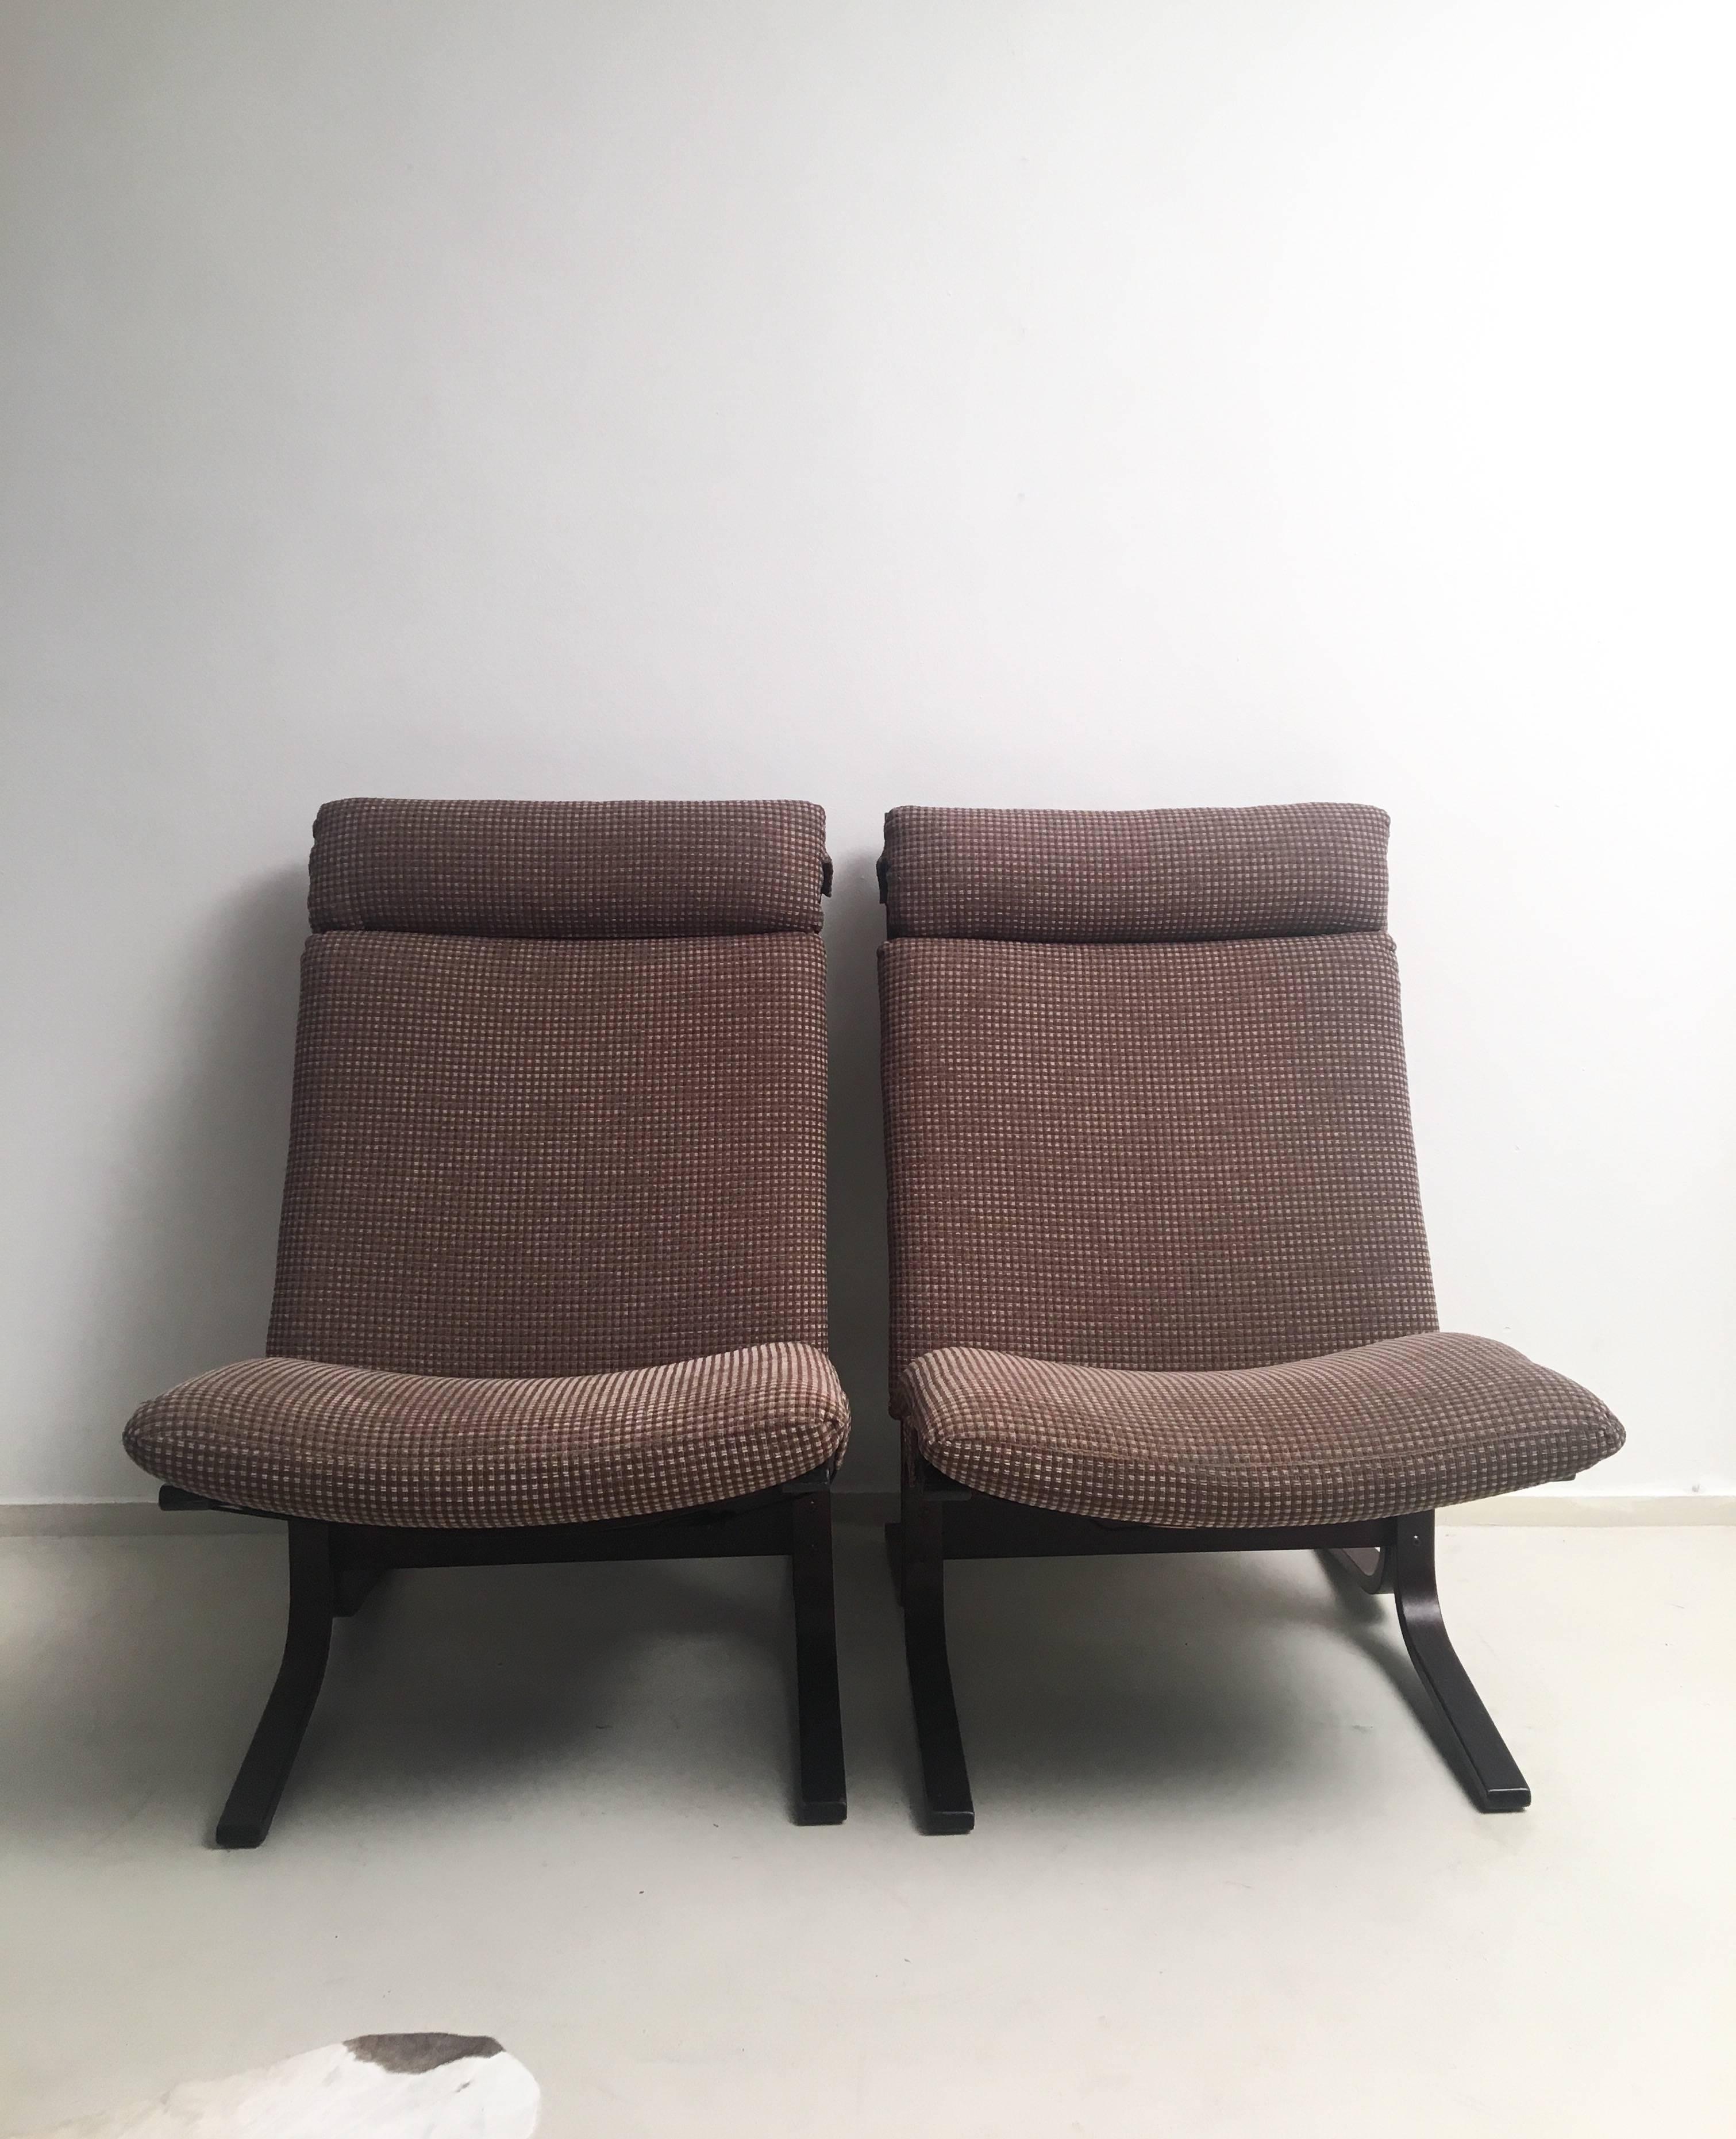 This set of sling chairs were designed by Ingmar Relling, circa the 1960s in Norway. They feature a dark bentwood frame, thick and very comfortable cushions with a mixed brown colored fabric. One of the chairs is labeled with the manufacturers